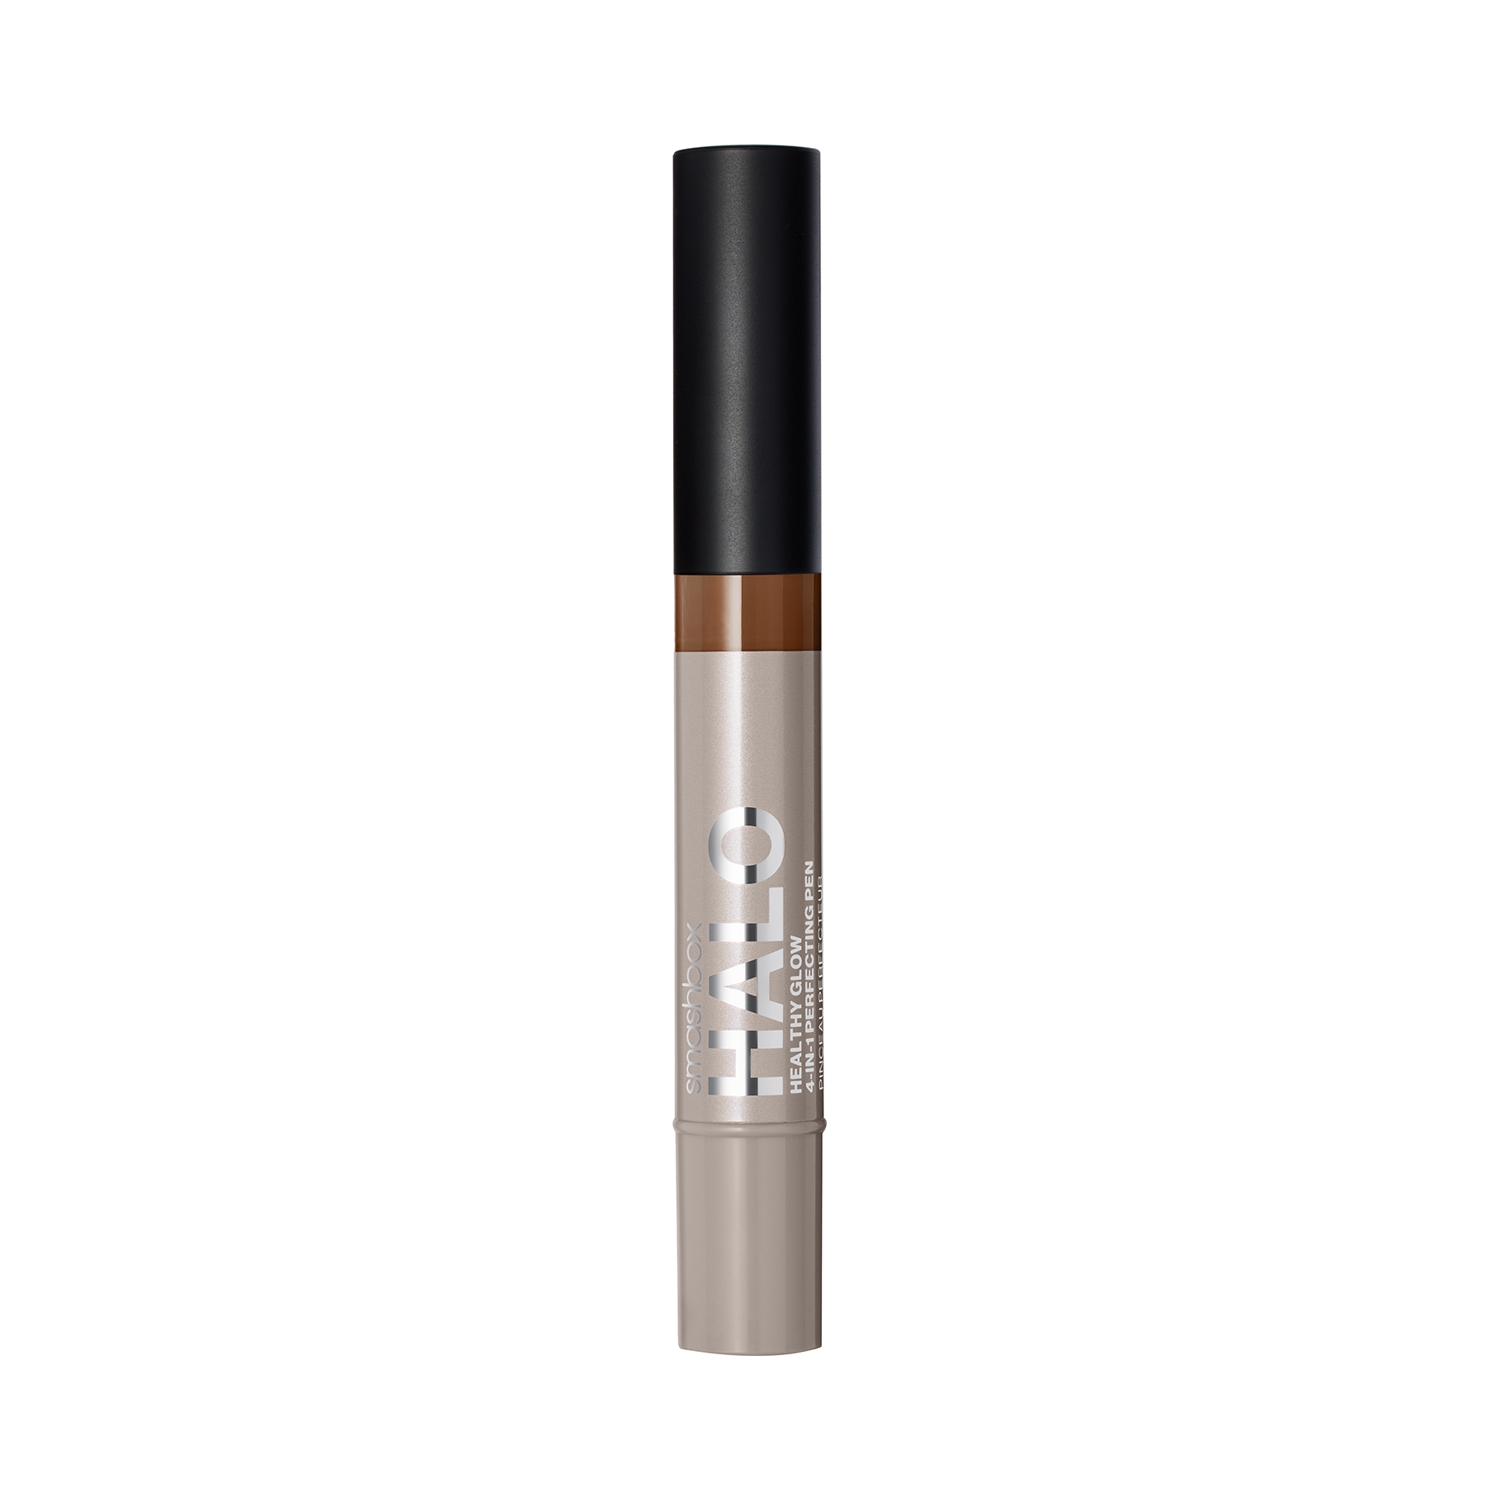 Smashbox | Smashbox Halo Healthy Glow 4-In-1 Perfecting Concealer Pen - T20N (3.5ml)